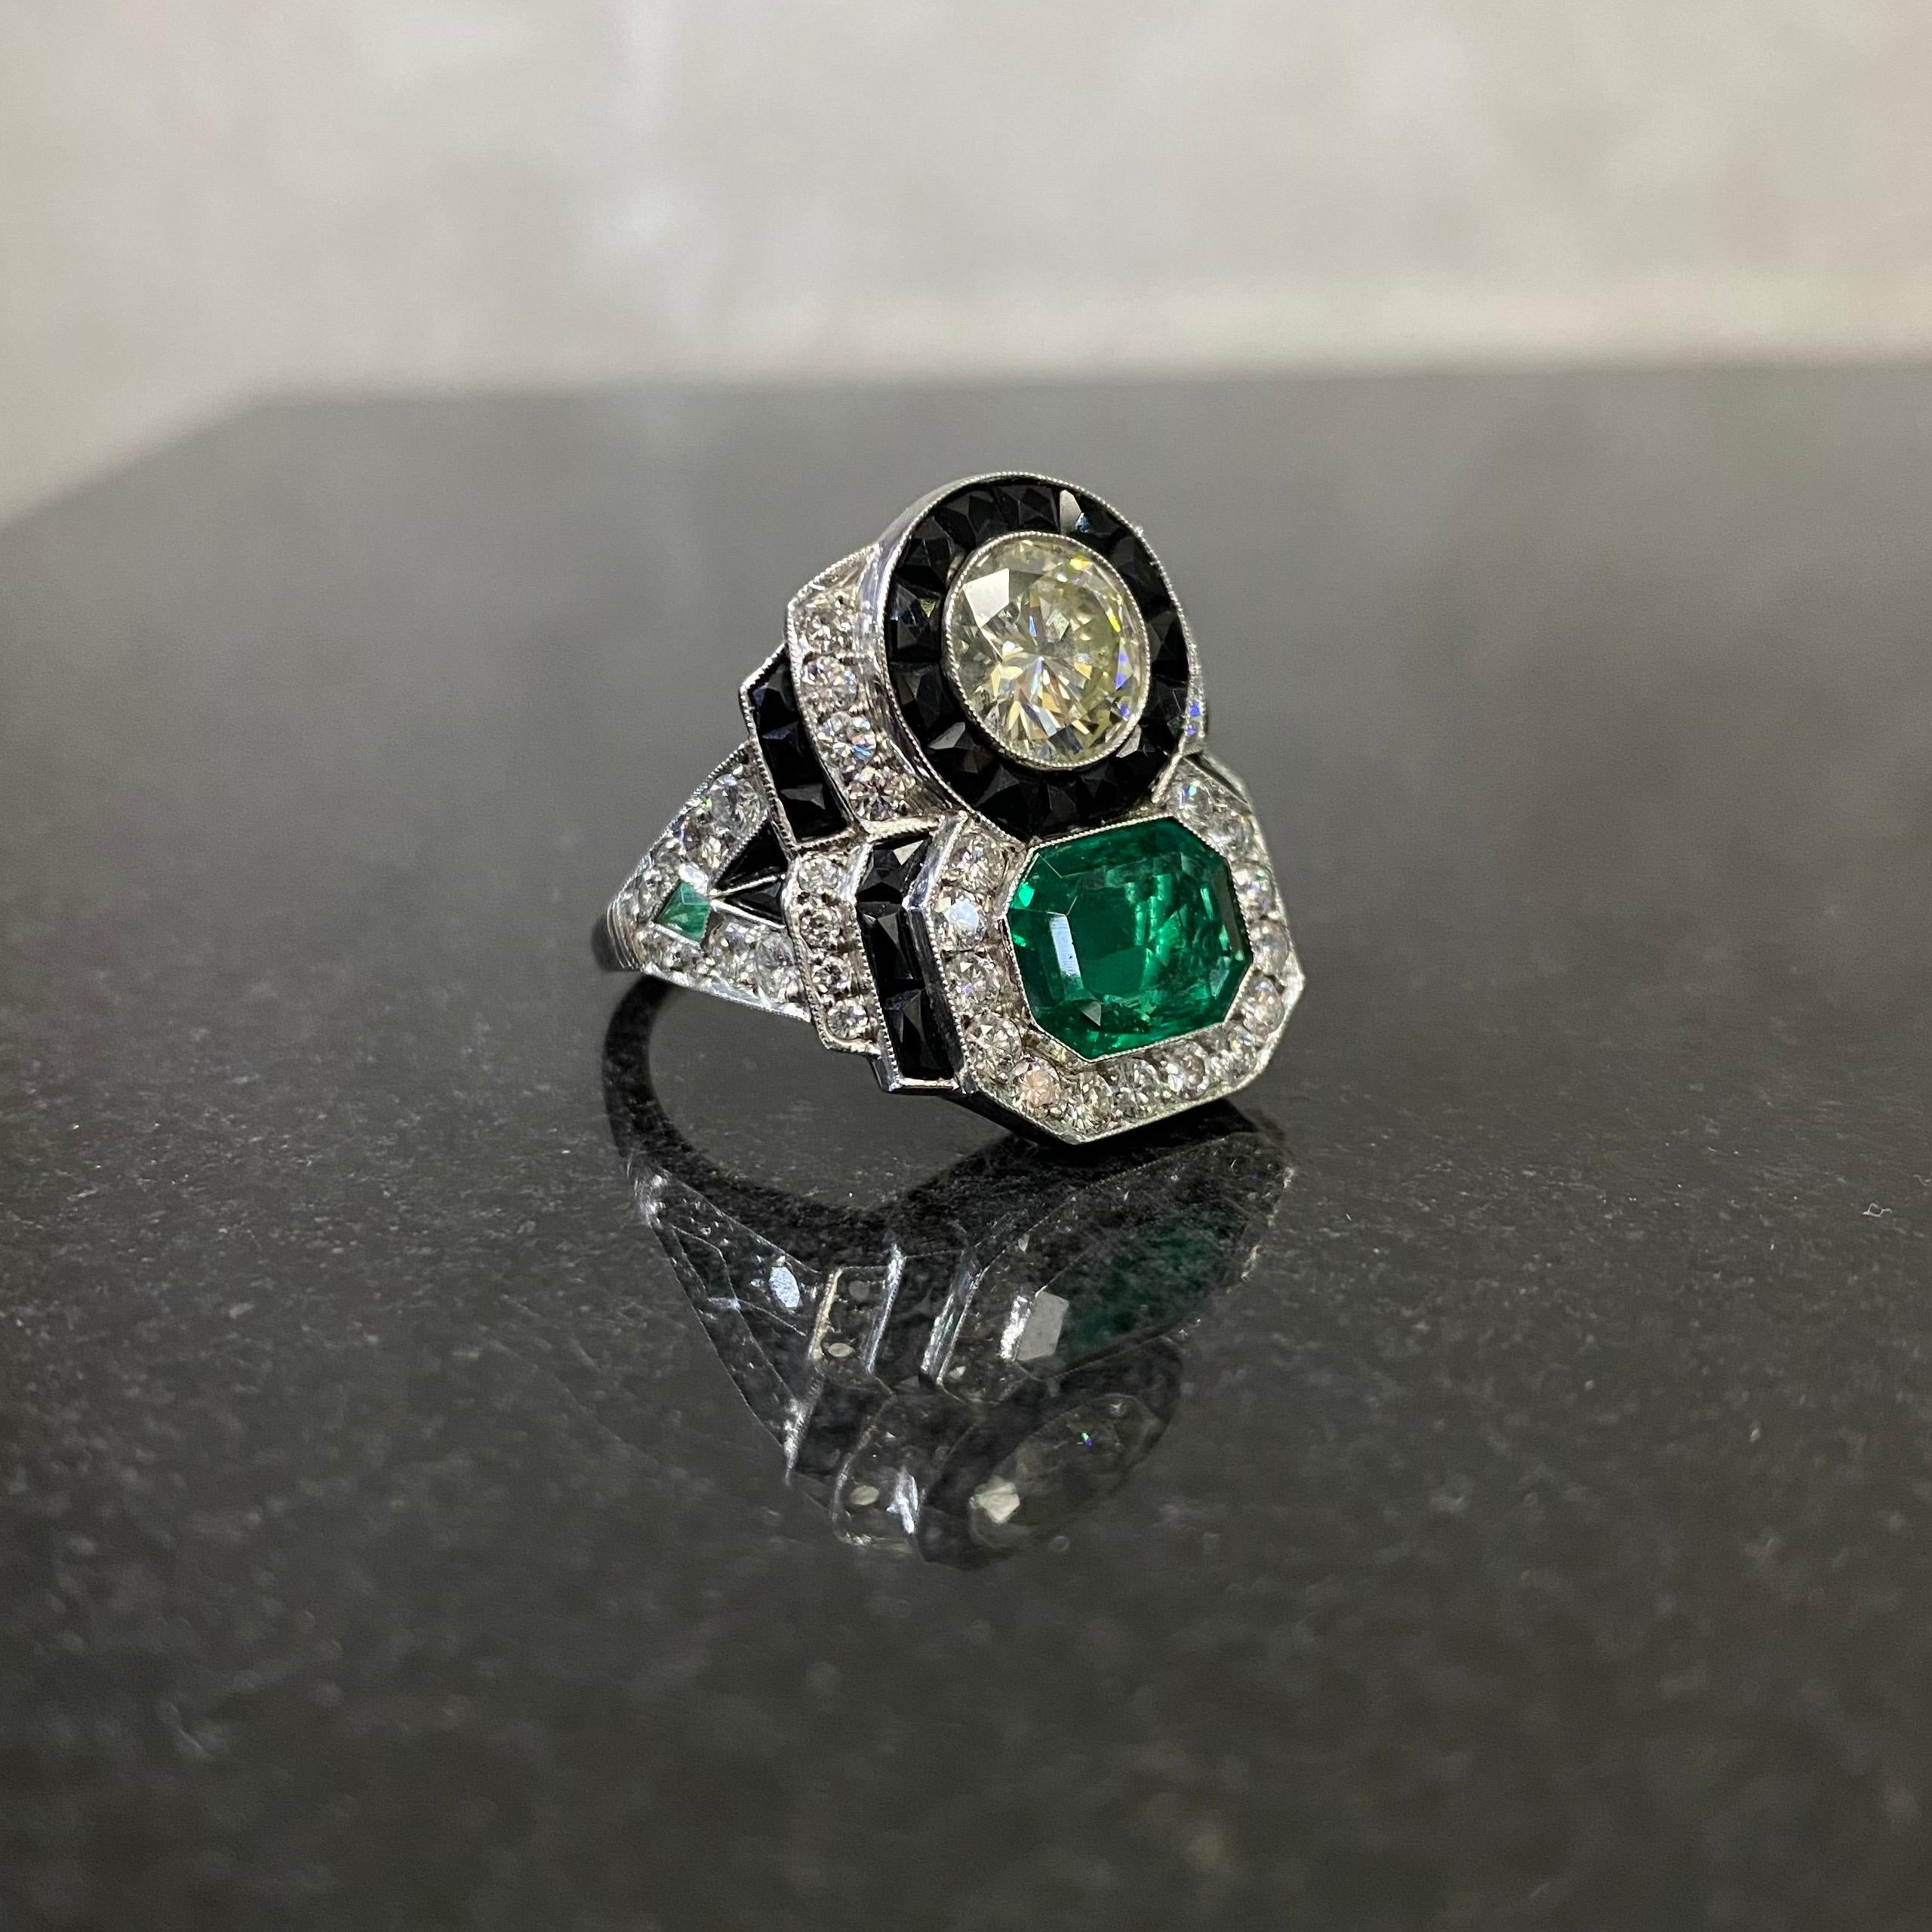 Vintage Colombian Emerald, Diamond and Onyx Bypass Cocktail Ring in Platinum, 1990s. This jewel of Art Deco inspiration features a vivid green Colombian emerald and a Transitional round brilliant-cut diamond, in a stylized bypass ring that combines